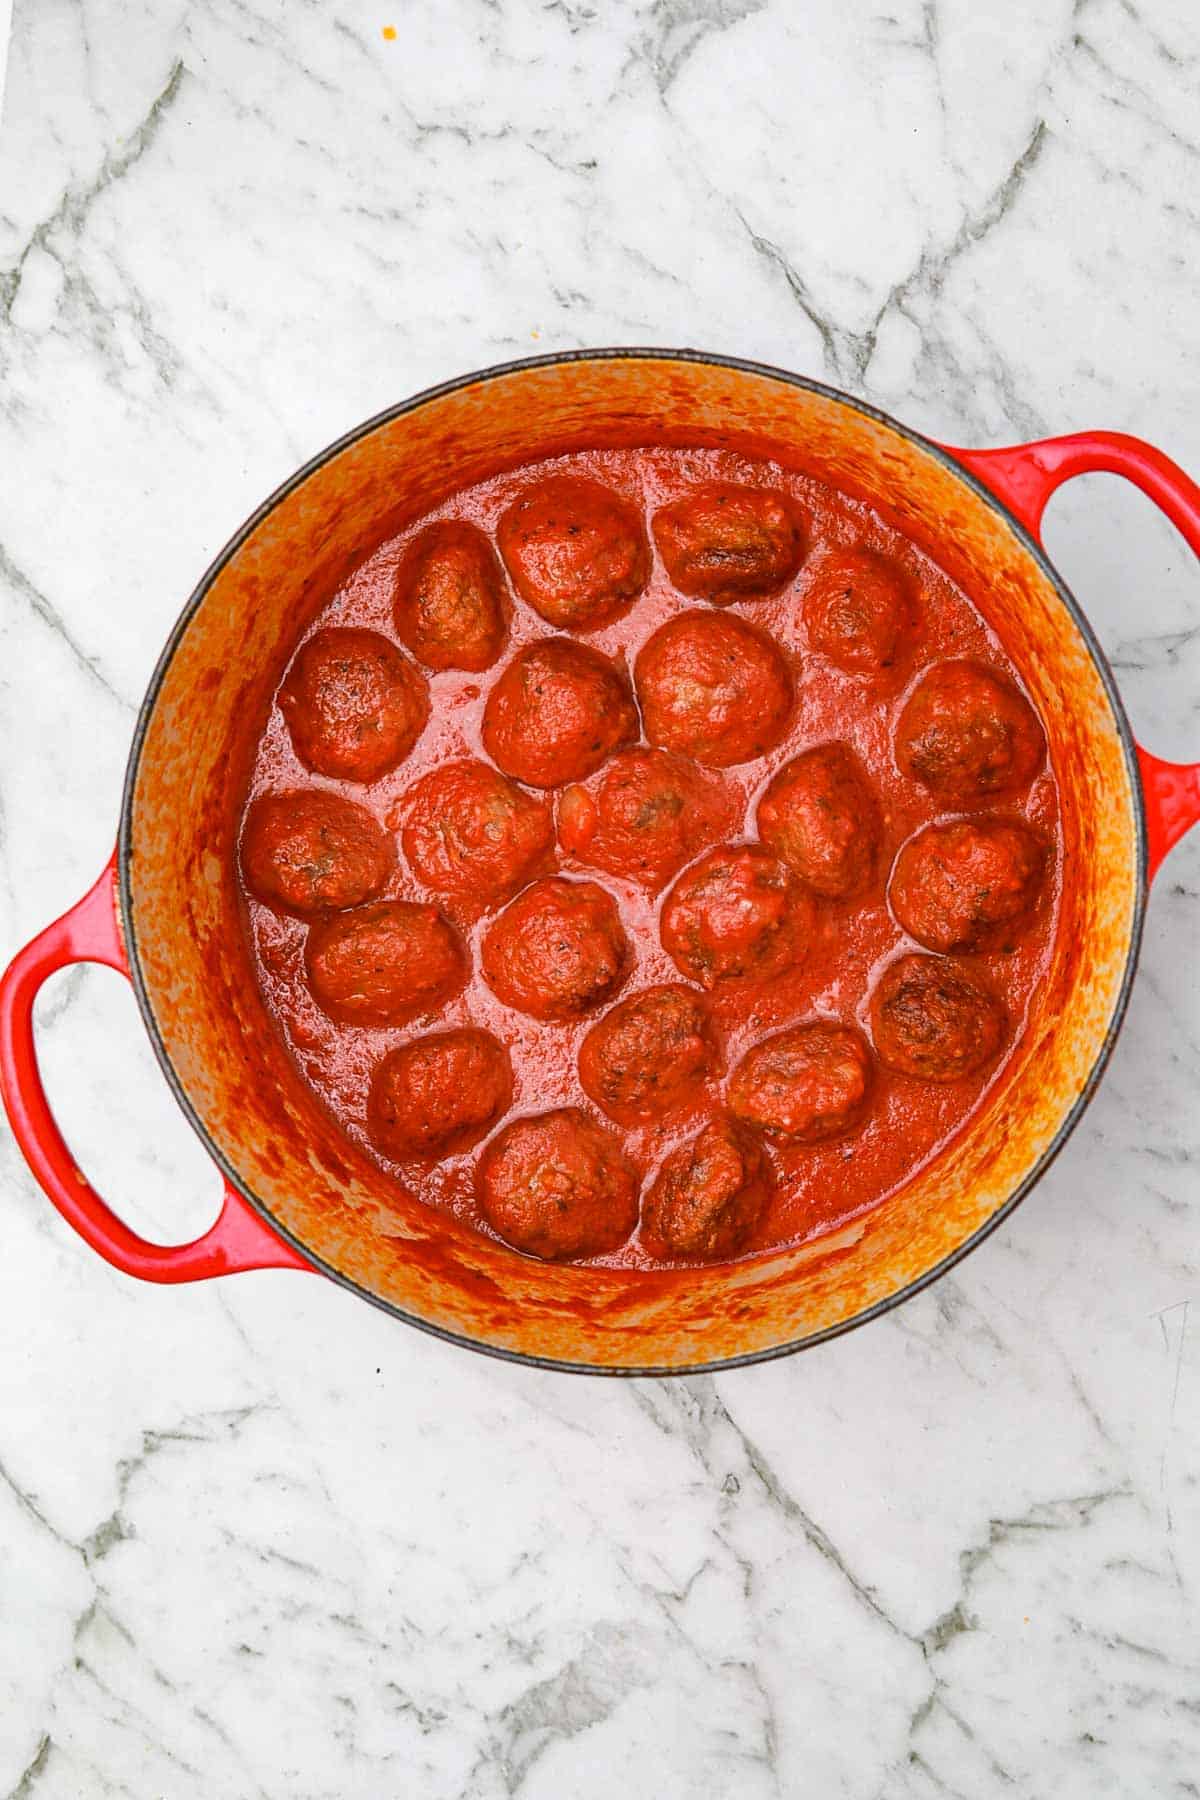 meatballs added to the sauce in the pot.